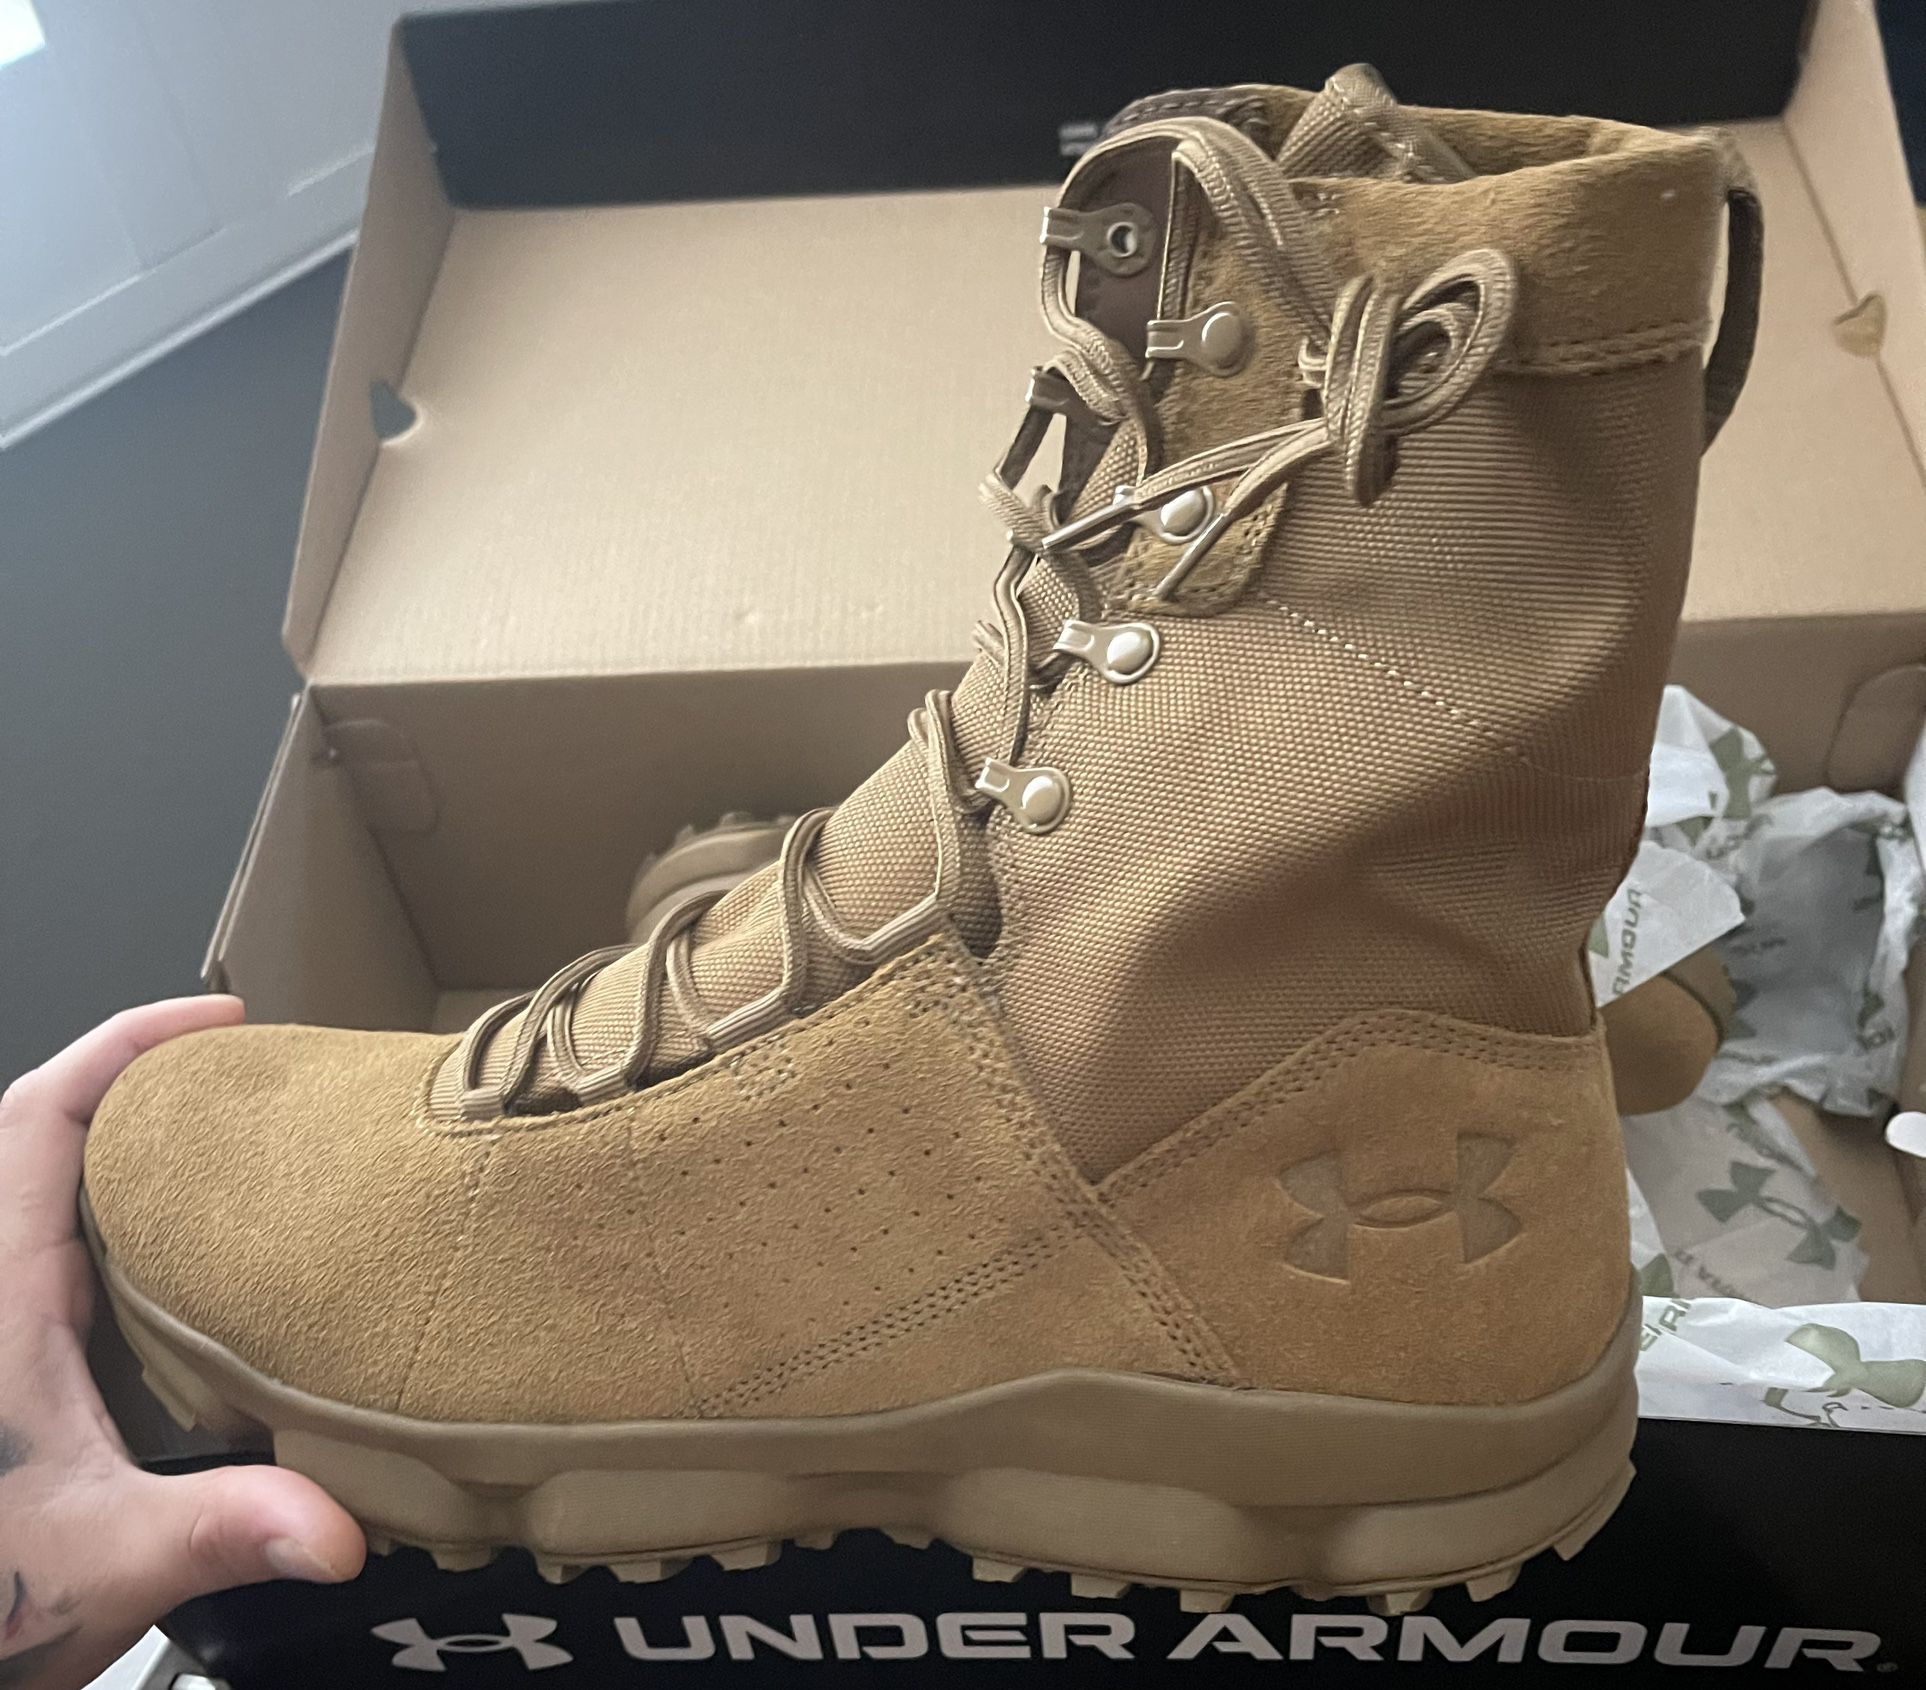 Under Armor Size 13 UA TAC Load out boots  